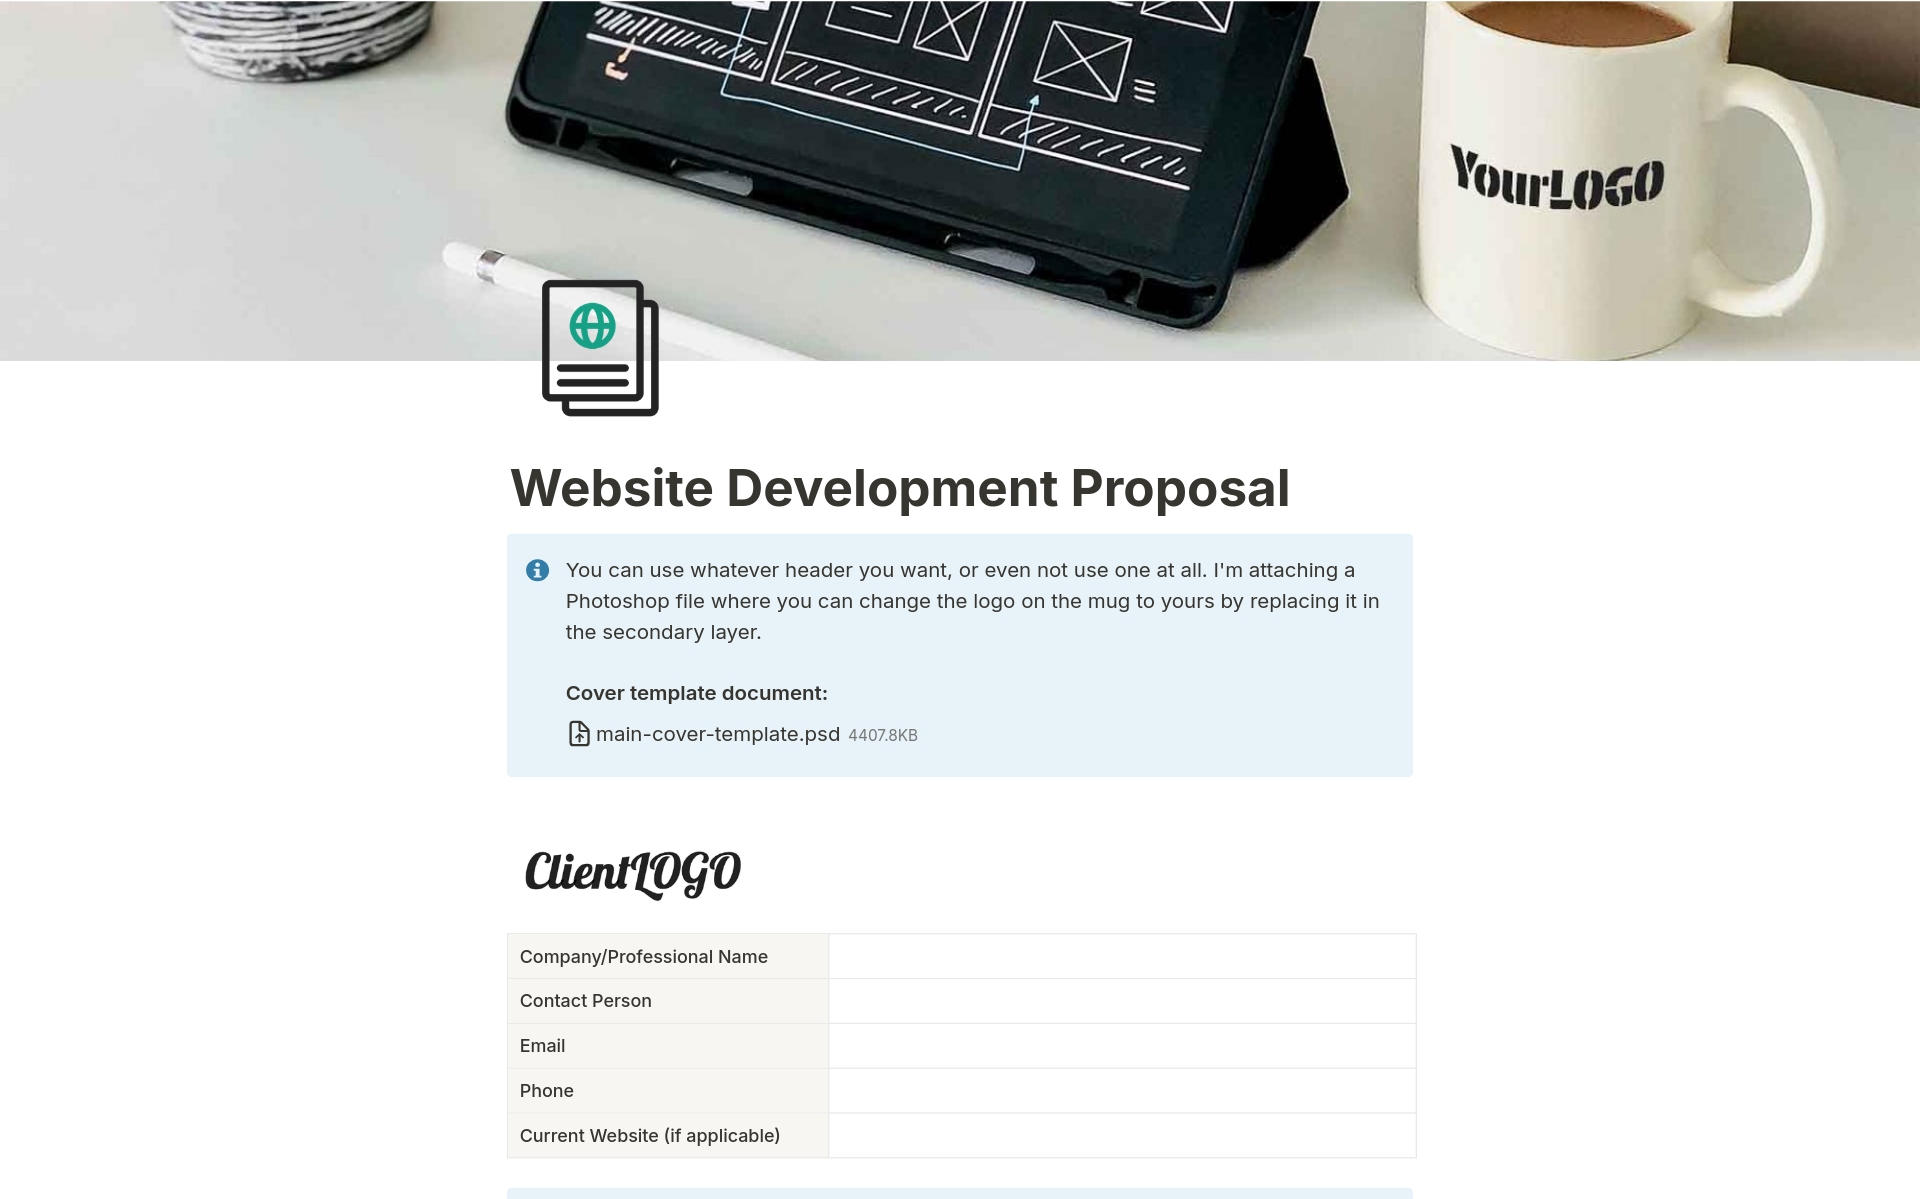 Easily craft professional project proposals with our Website Development Proposal Template. Whether you're a seasoned agency, freelance professional, or business owner, this template simplifies the process of presenting your project proposals to clients.